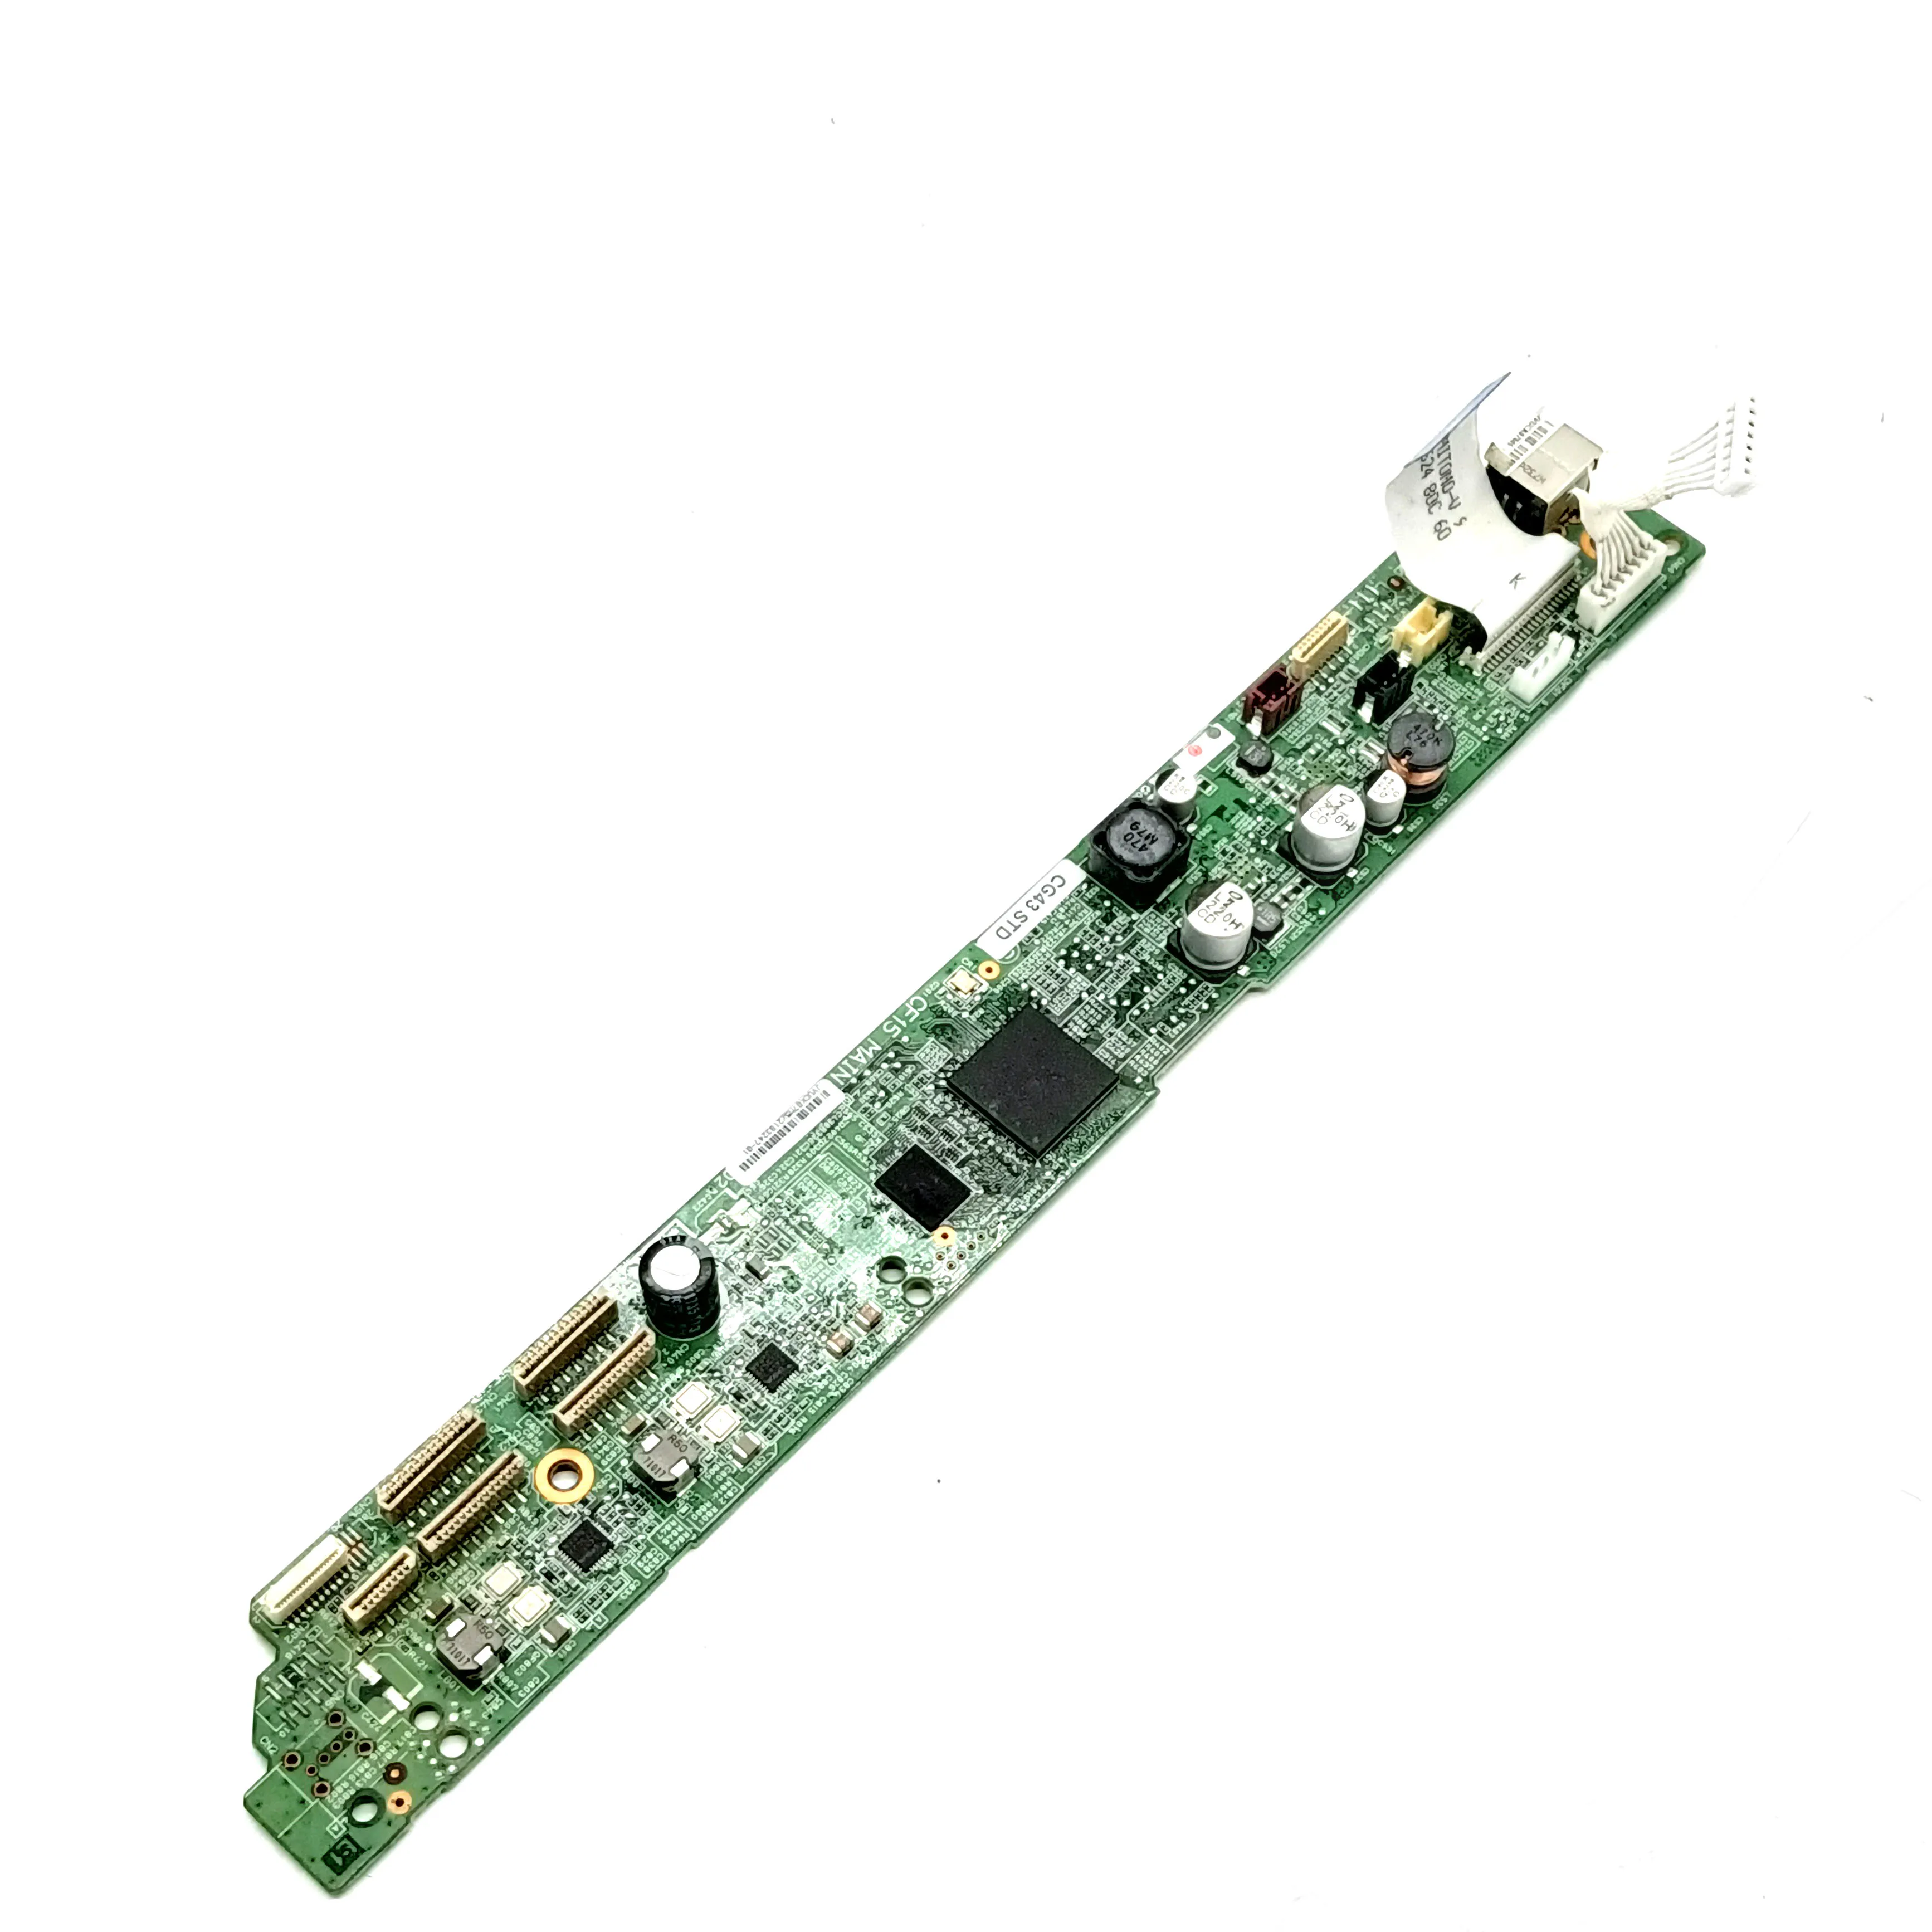 

Main Board Motherboard CG43 MAIN XP-15080 Fits For Epson Epson xp15080 15080 XP15080 xp-15080